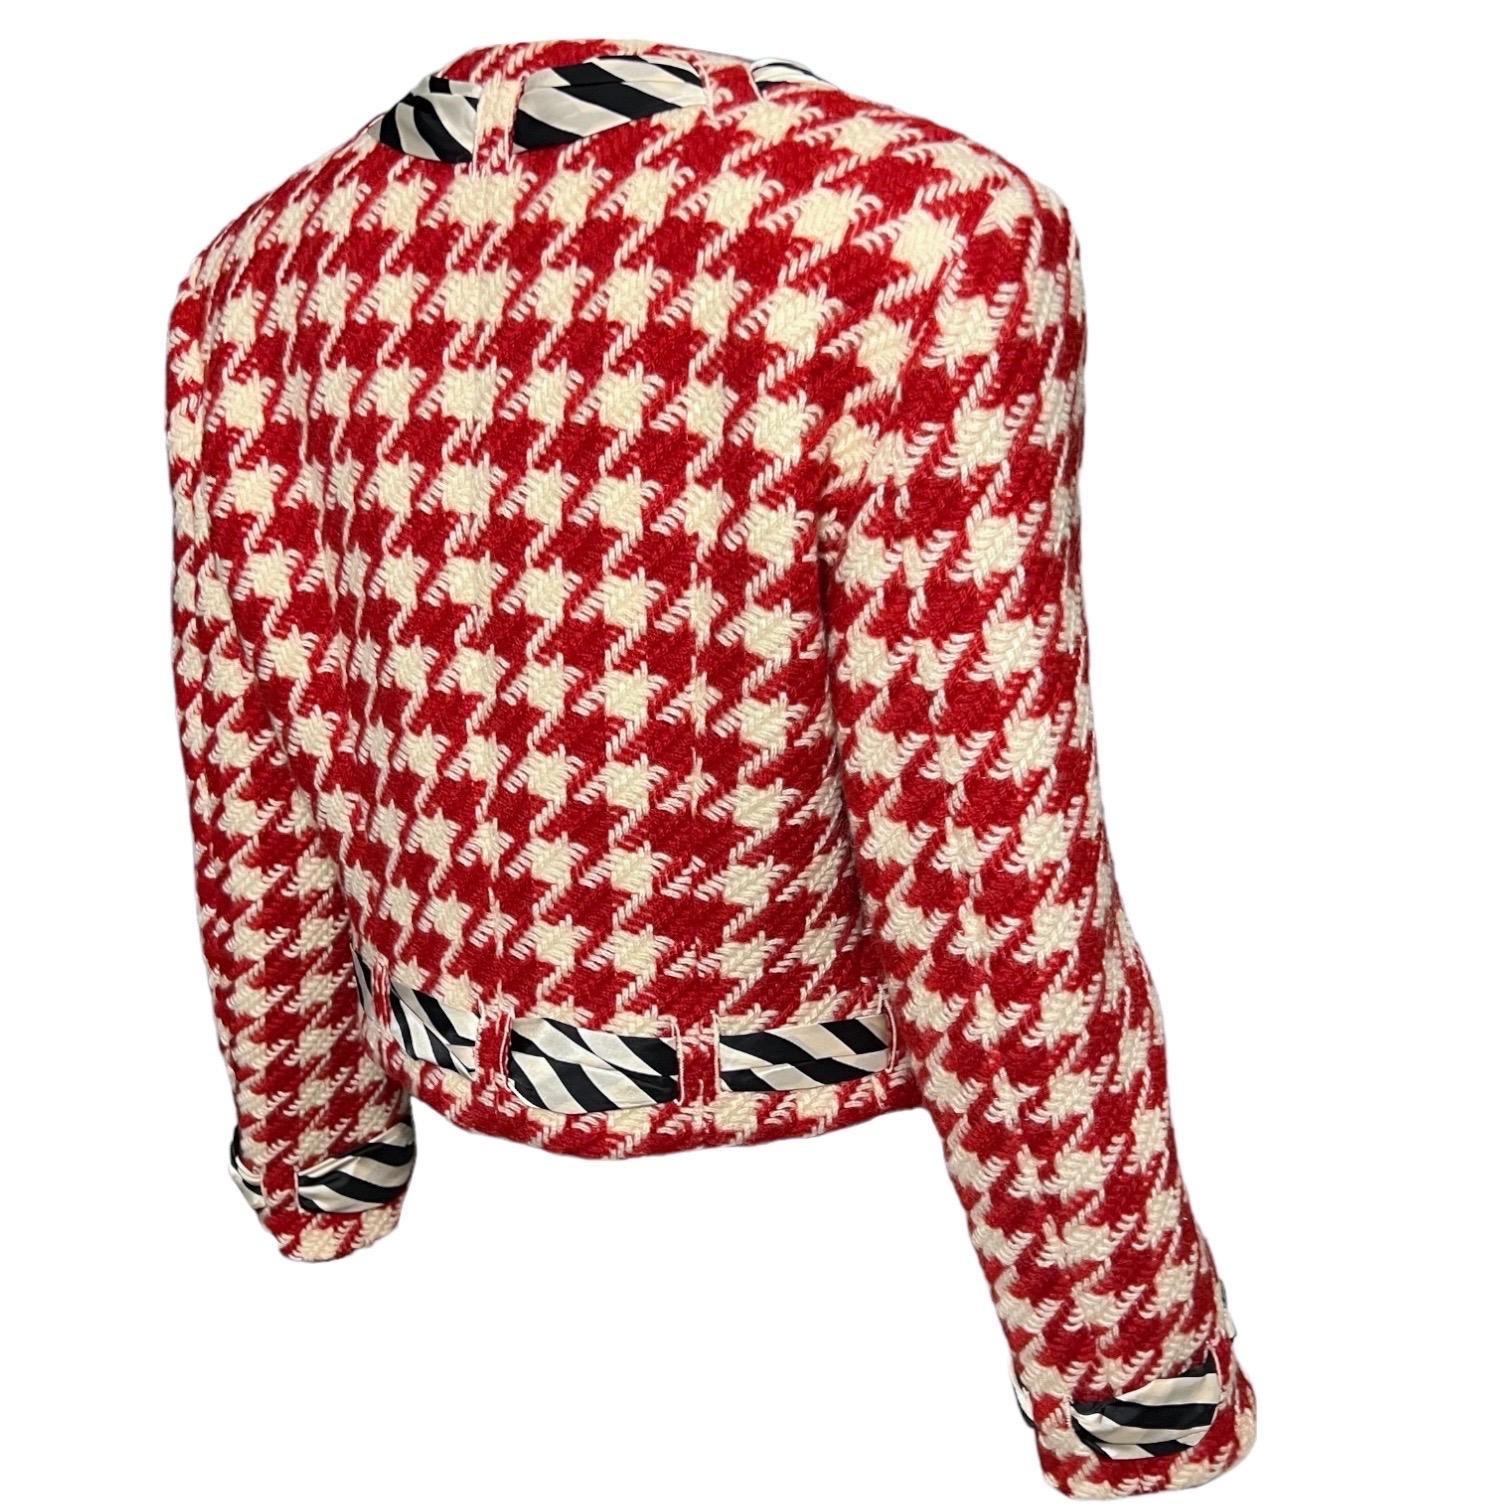 Moschino Cheap and Chic Vintage Houndstooth Jacket as seen on Princess Diana 2